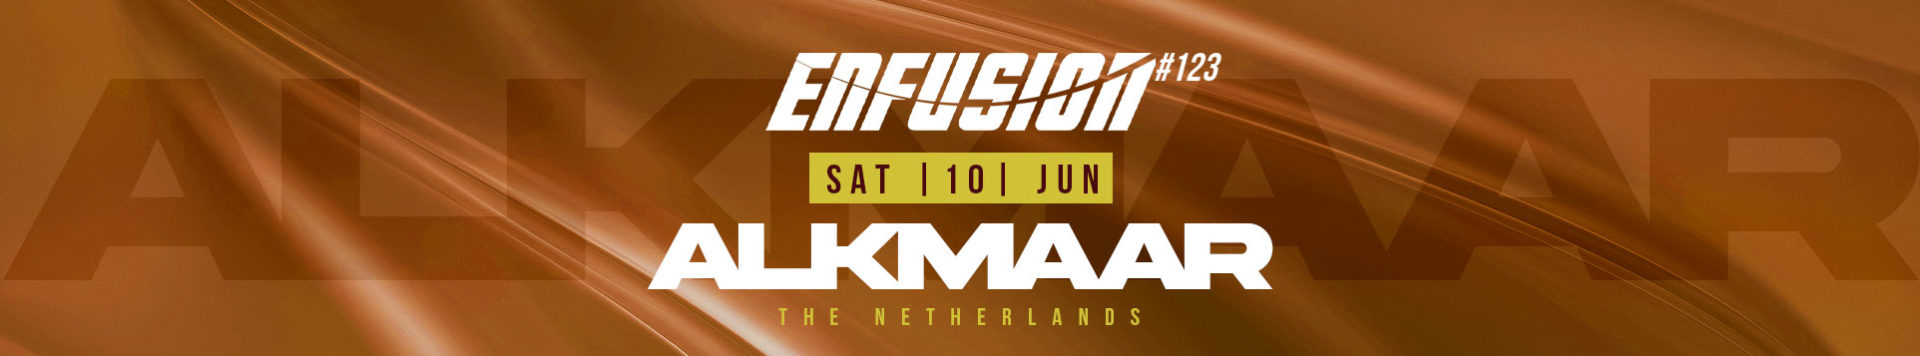 Enfusion 123 Tickets